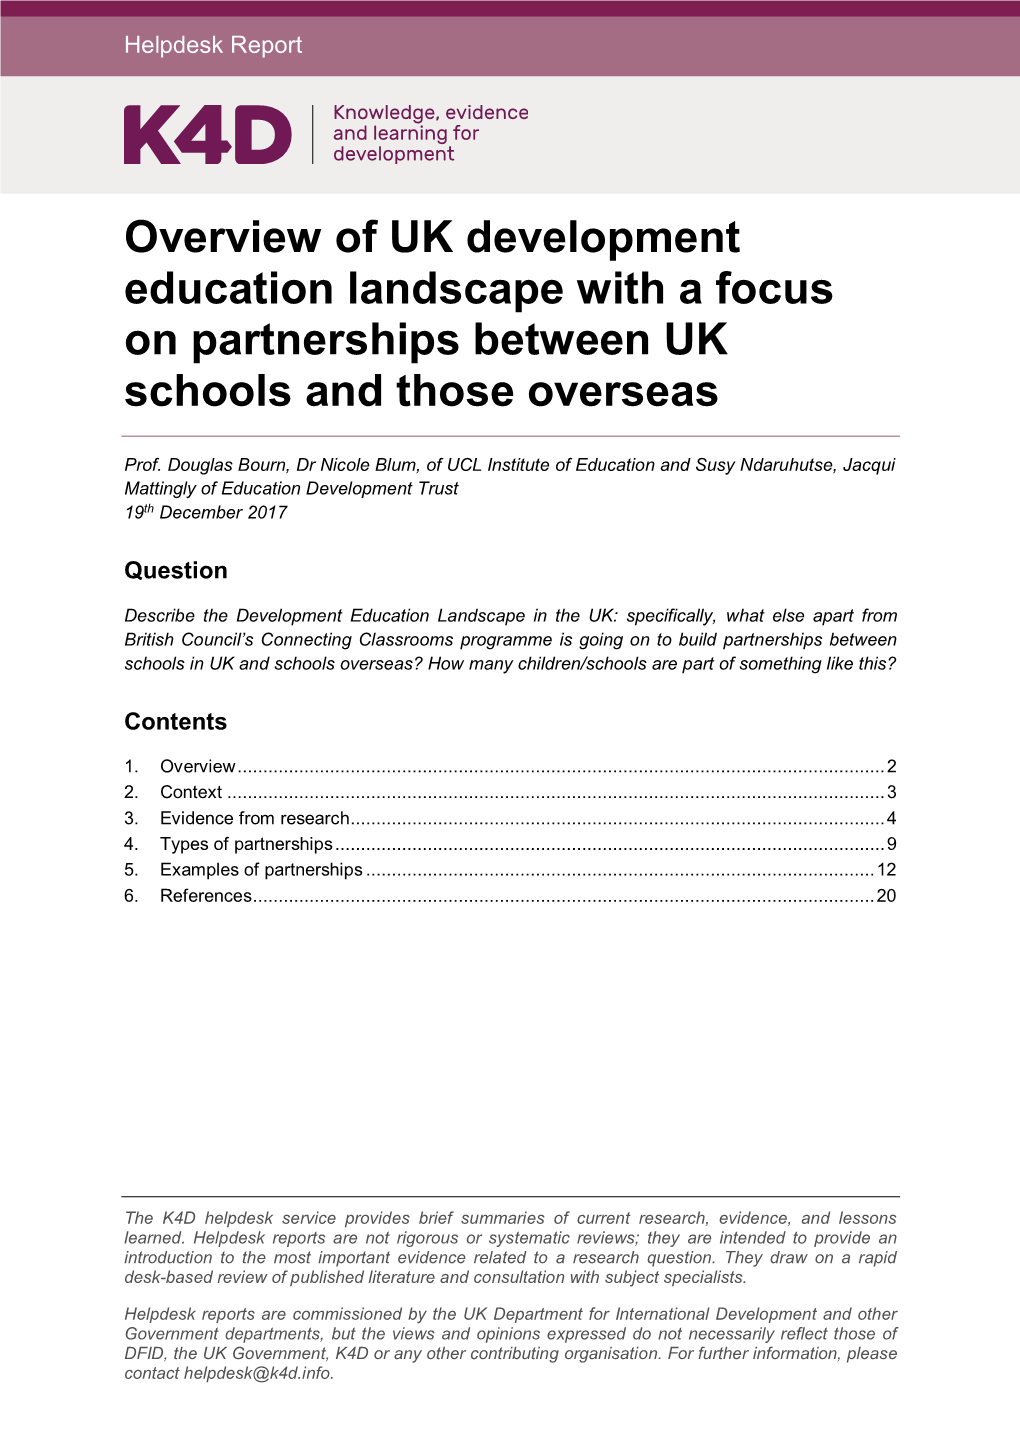 Overview of UK Development Education Landscape with a Focus on Partnerships Between UK Schools and Those Overseas